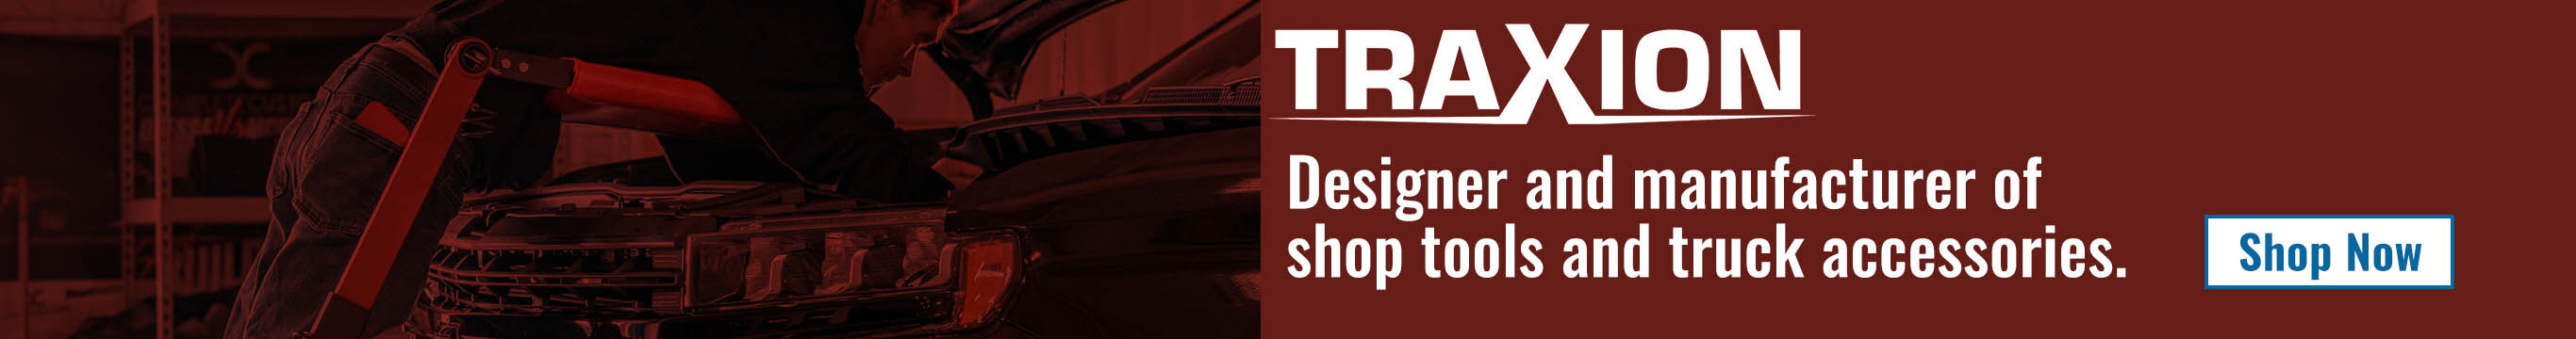 Traxion. Designer and manufacturer of shop tools and truck accessories.